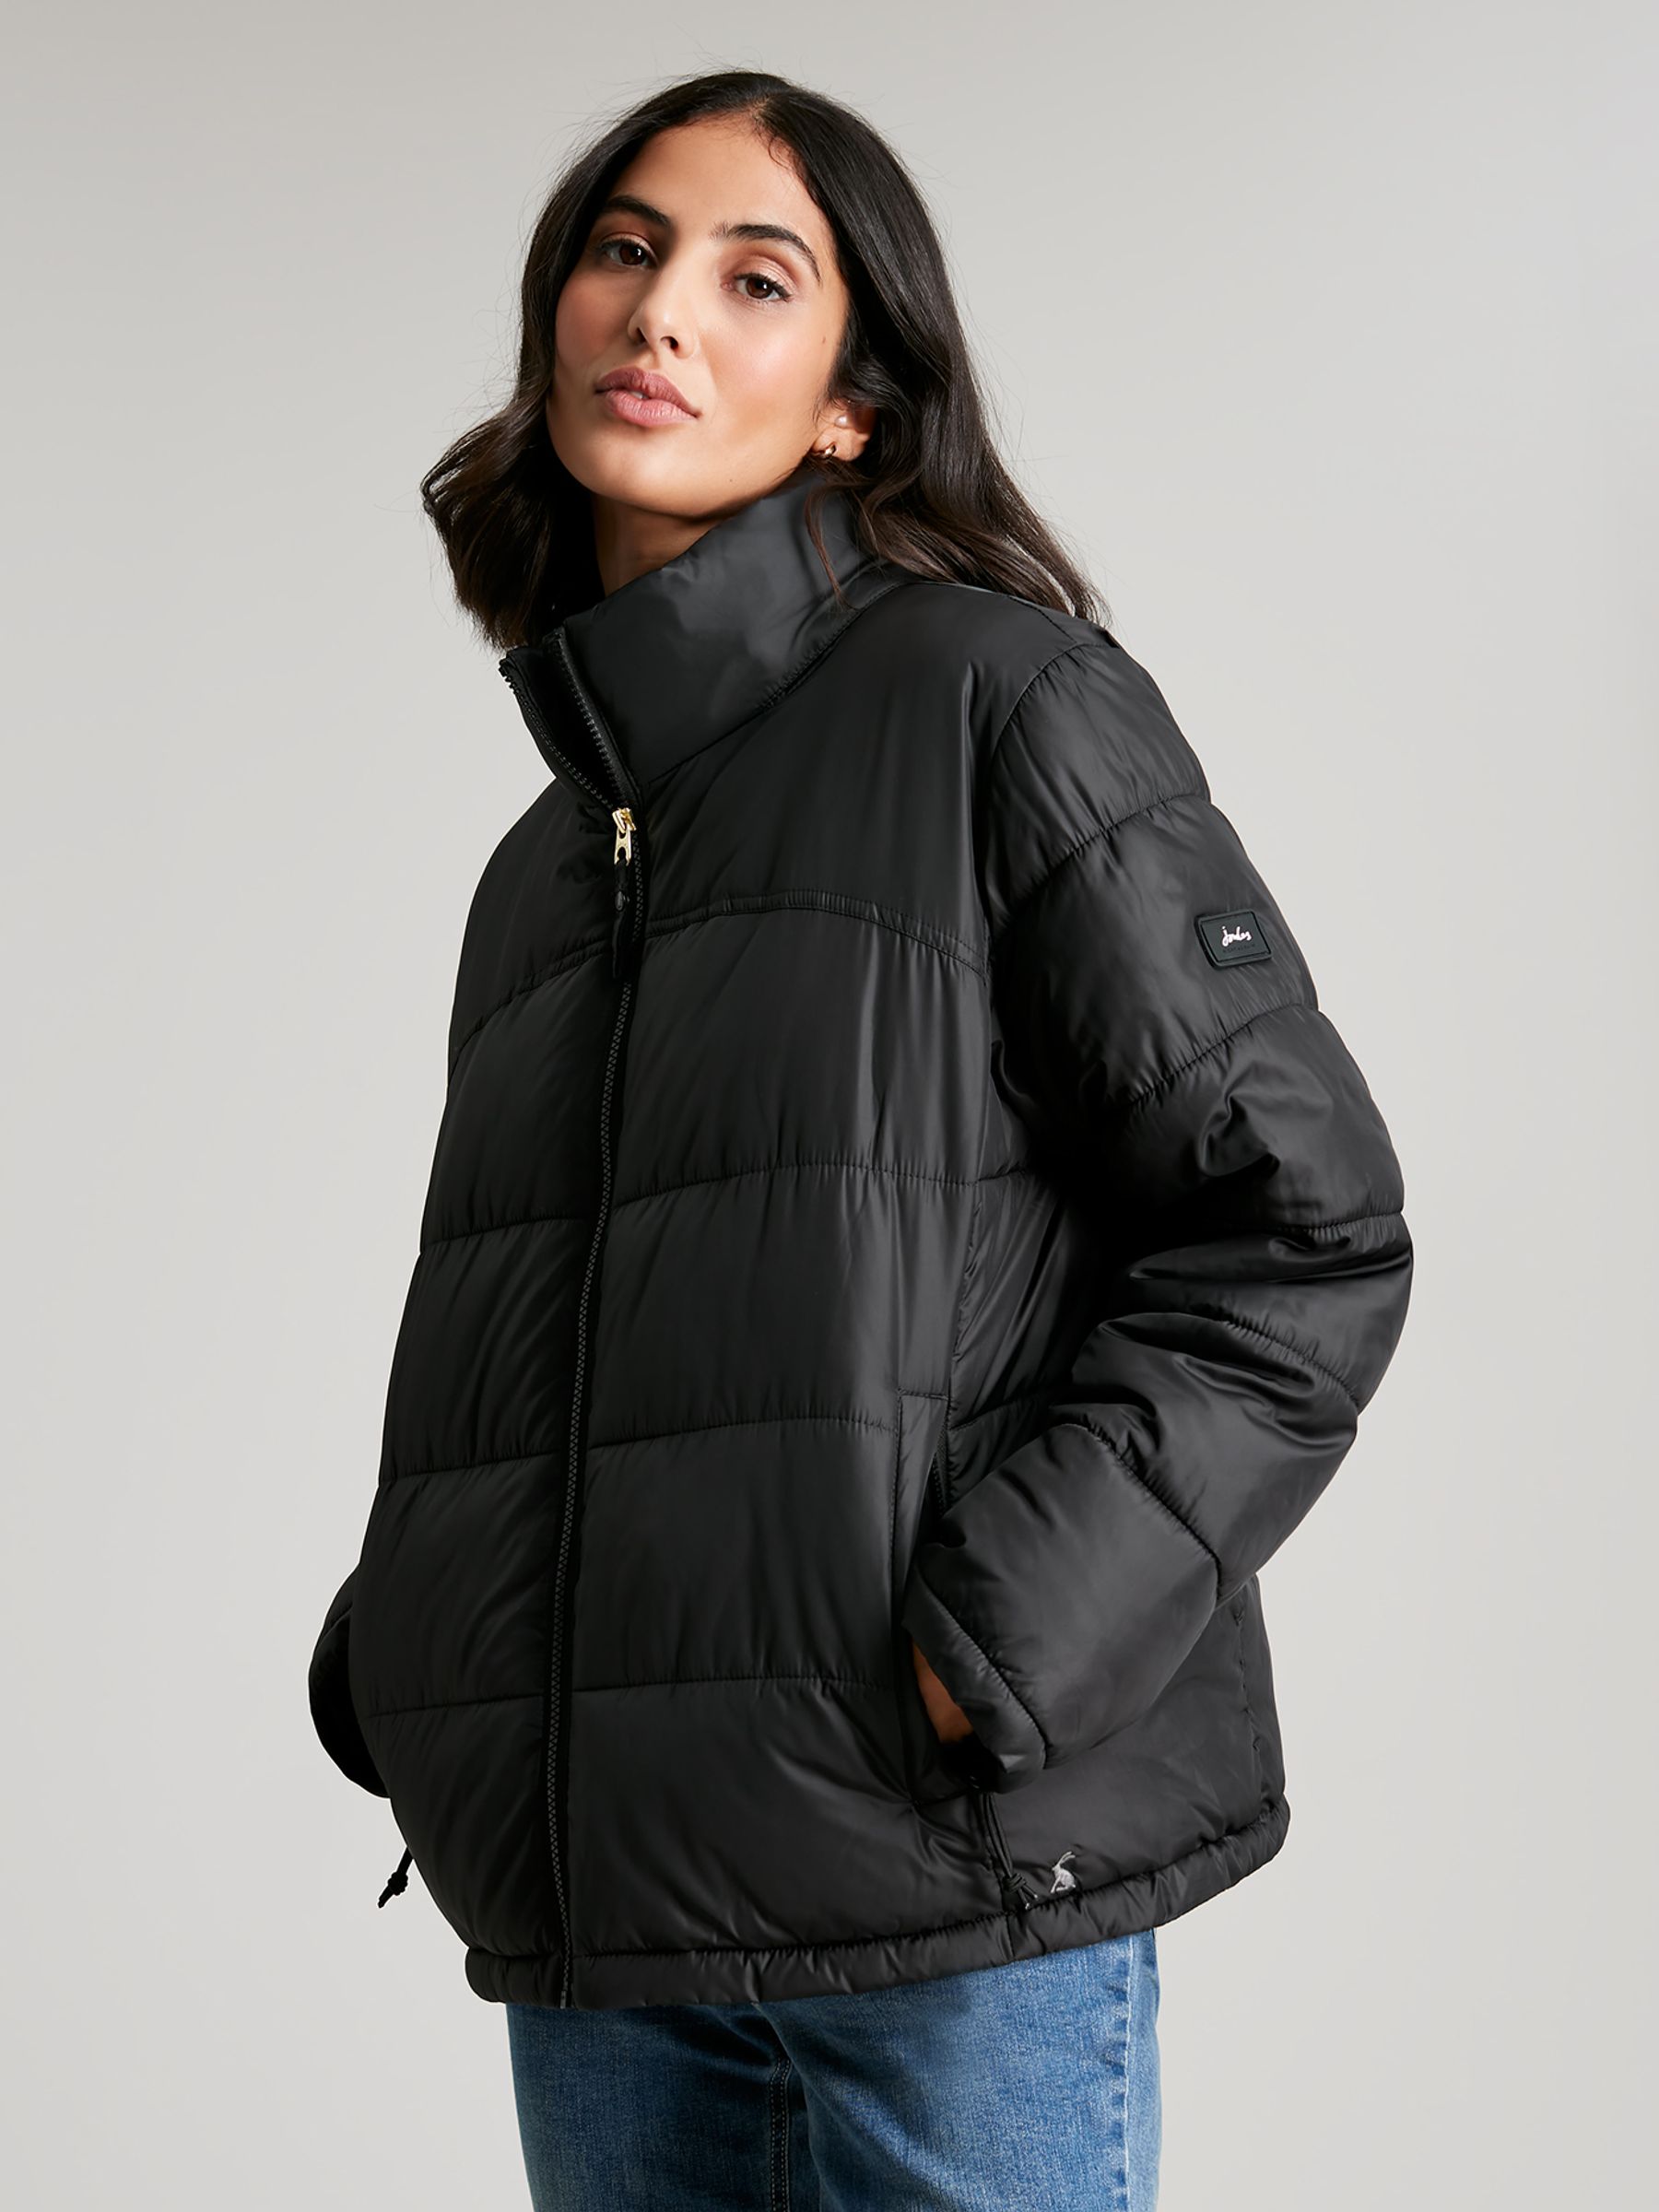 Buy Joules Elberry Super Puffer Black Jacket from the Joules online shop